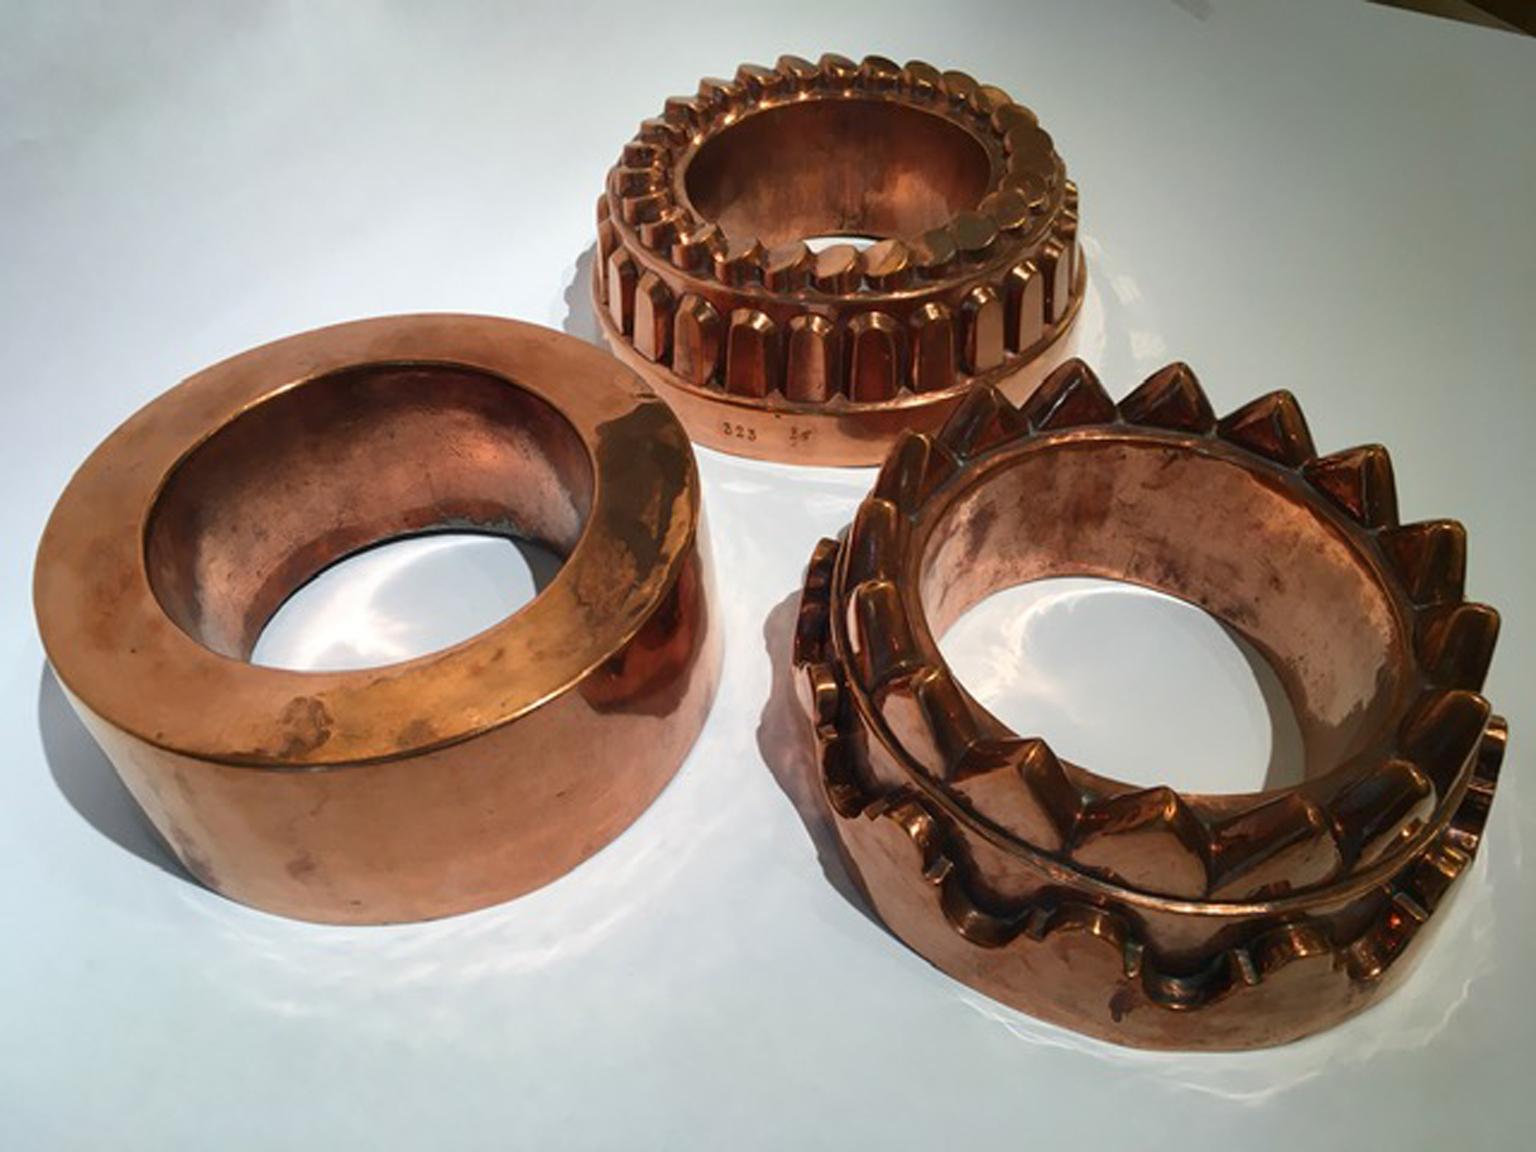 These pudding molds are a set composed by three nice France pieces fine hand made in copper. One of these has a crown shape, very detailed.
Suitable to be hang on the dining or kitchen walls as decoration, they have the original hooks in